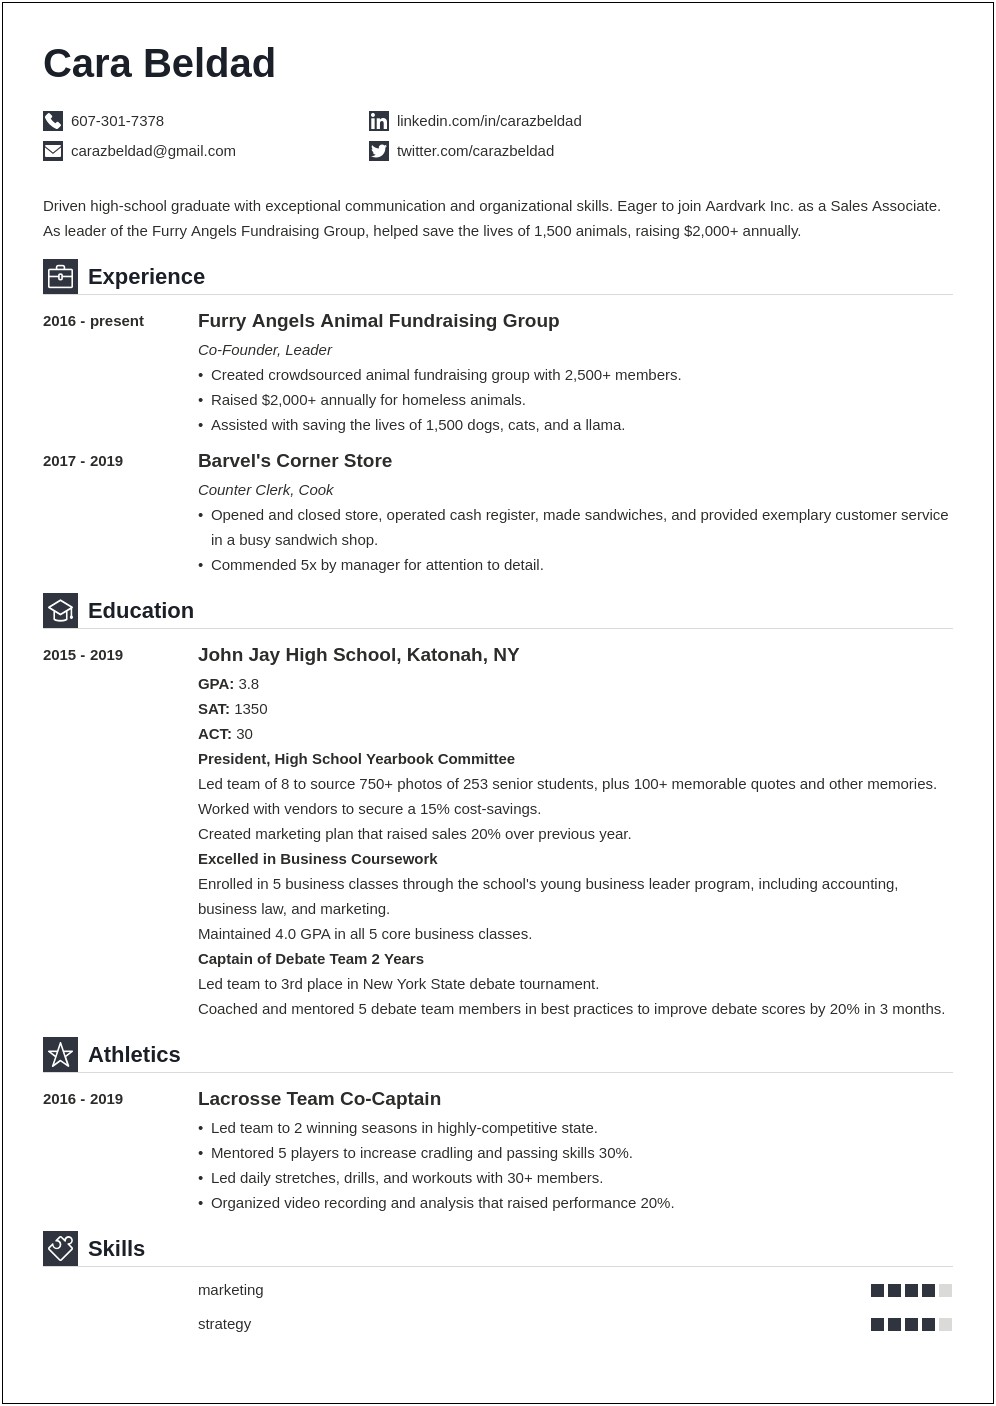 Resume Objective Examples For High School Graduate